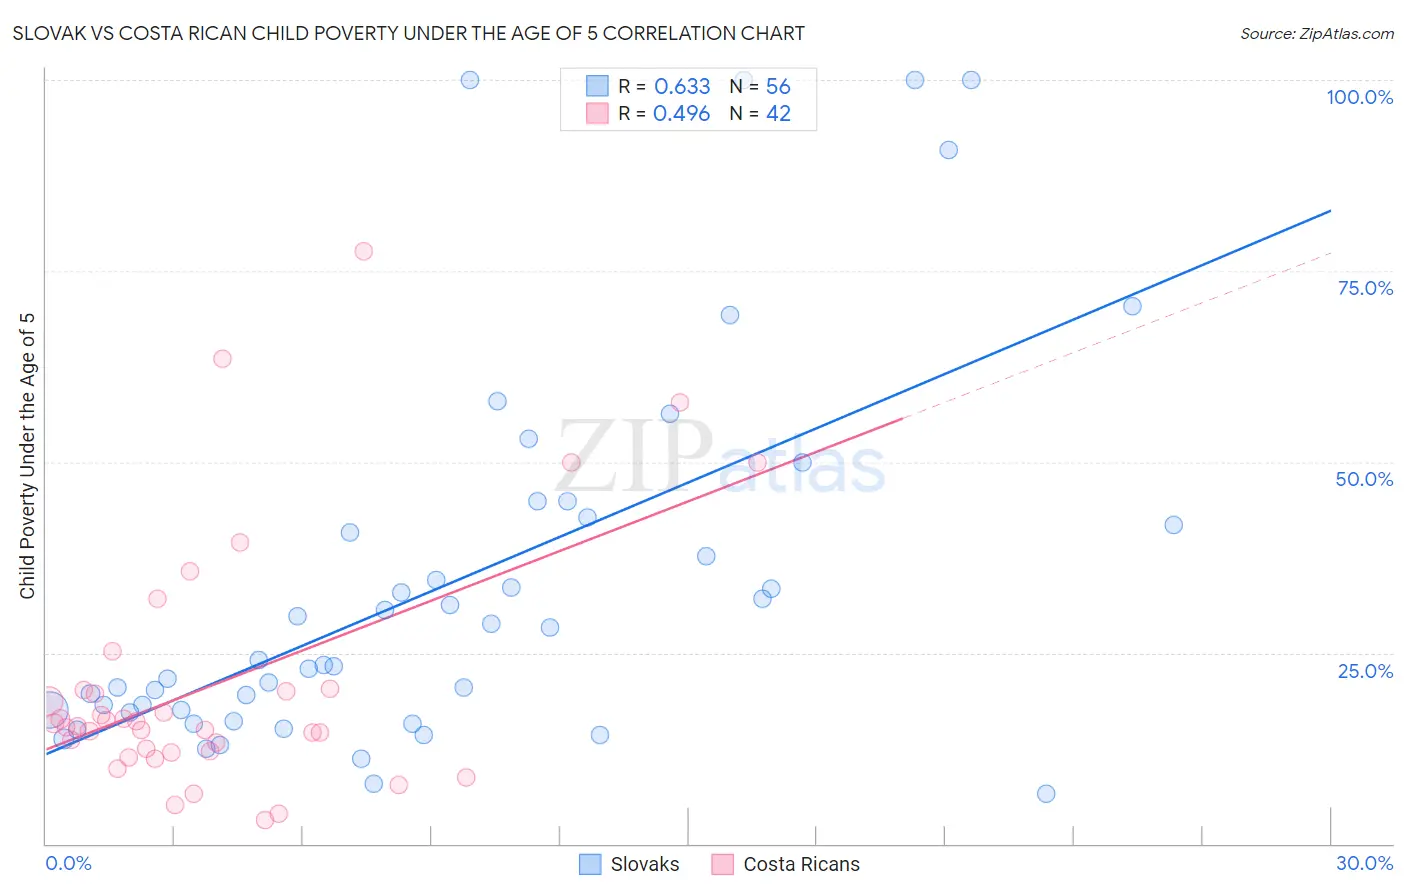 Slovak vs Costa Rican Child Poverty Under the Age of 5